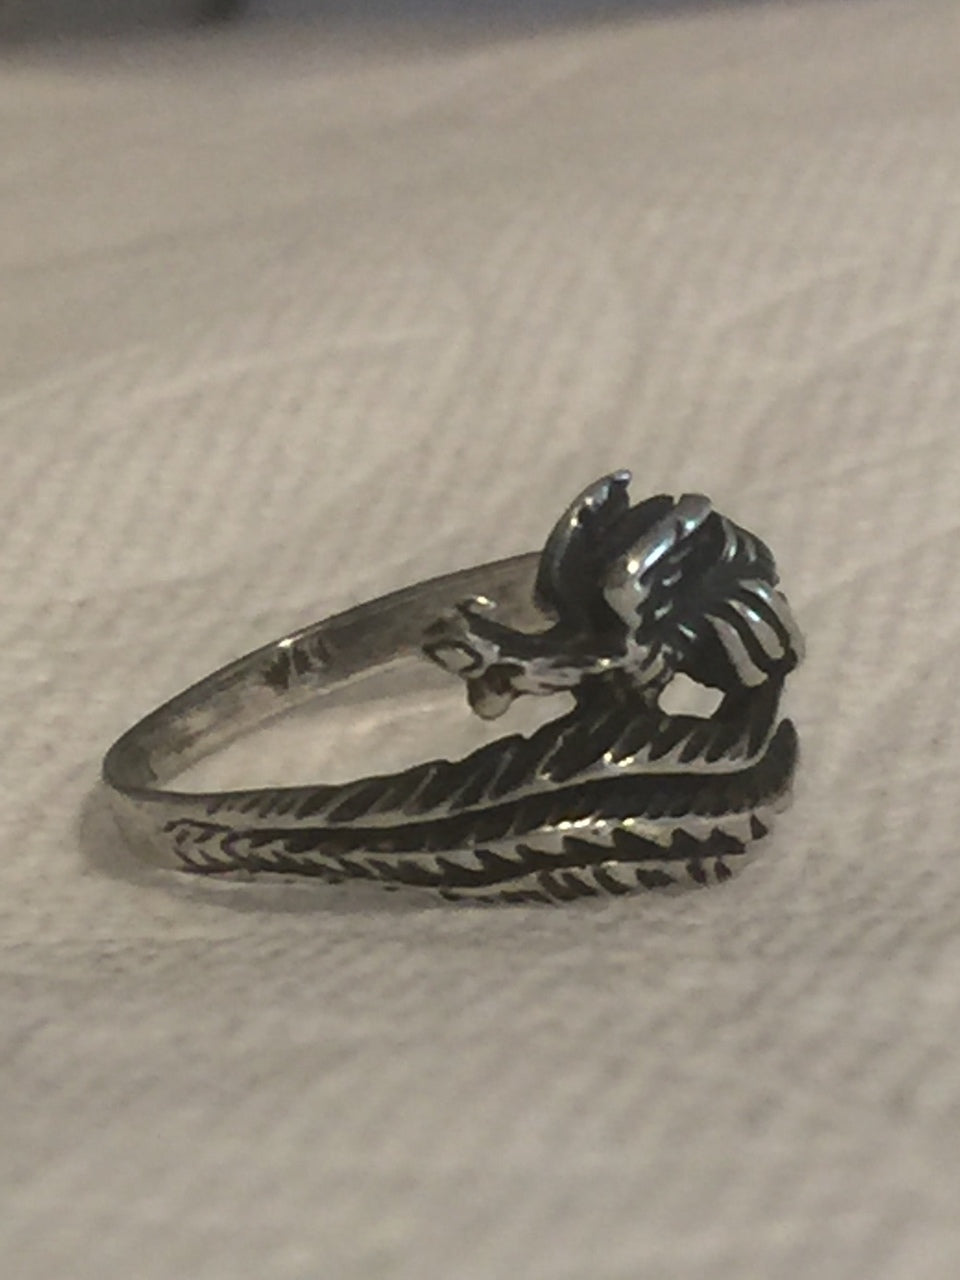 Vintage Sterling Silver Dragon  Ring Fantasy Myth Wings   Size 8.75    2.5g